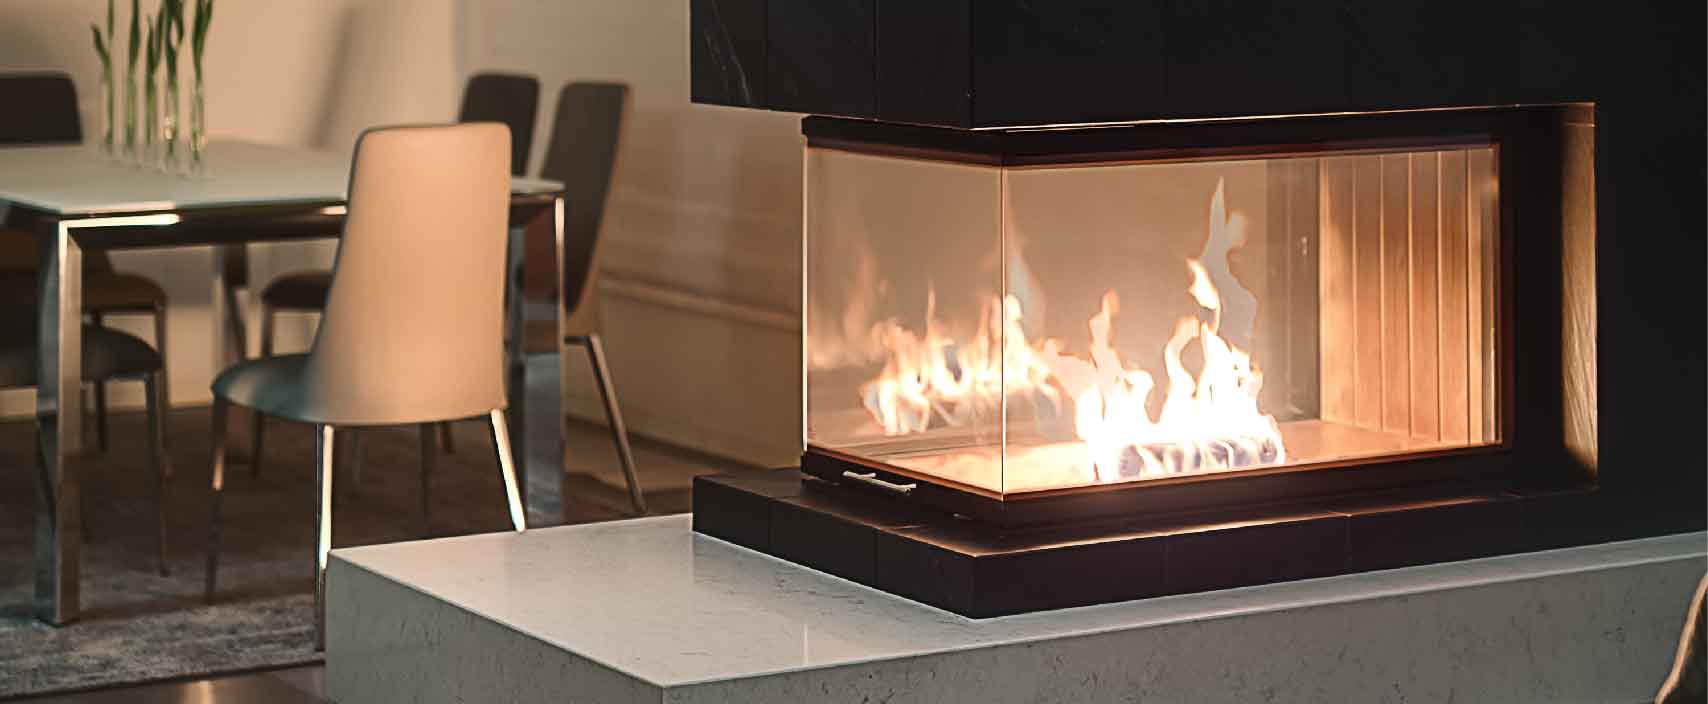 double-sided fireplaces